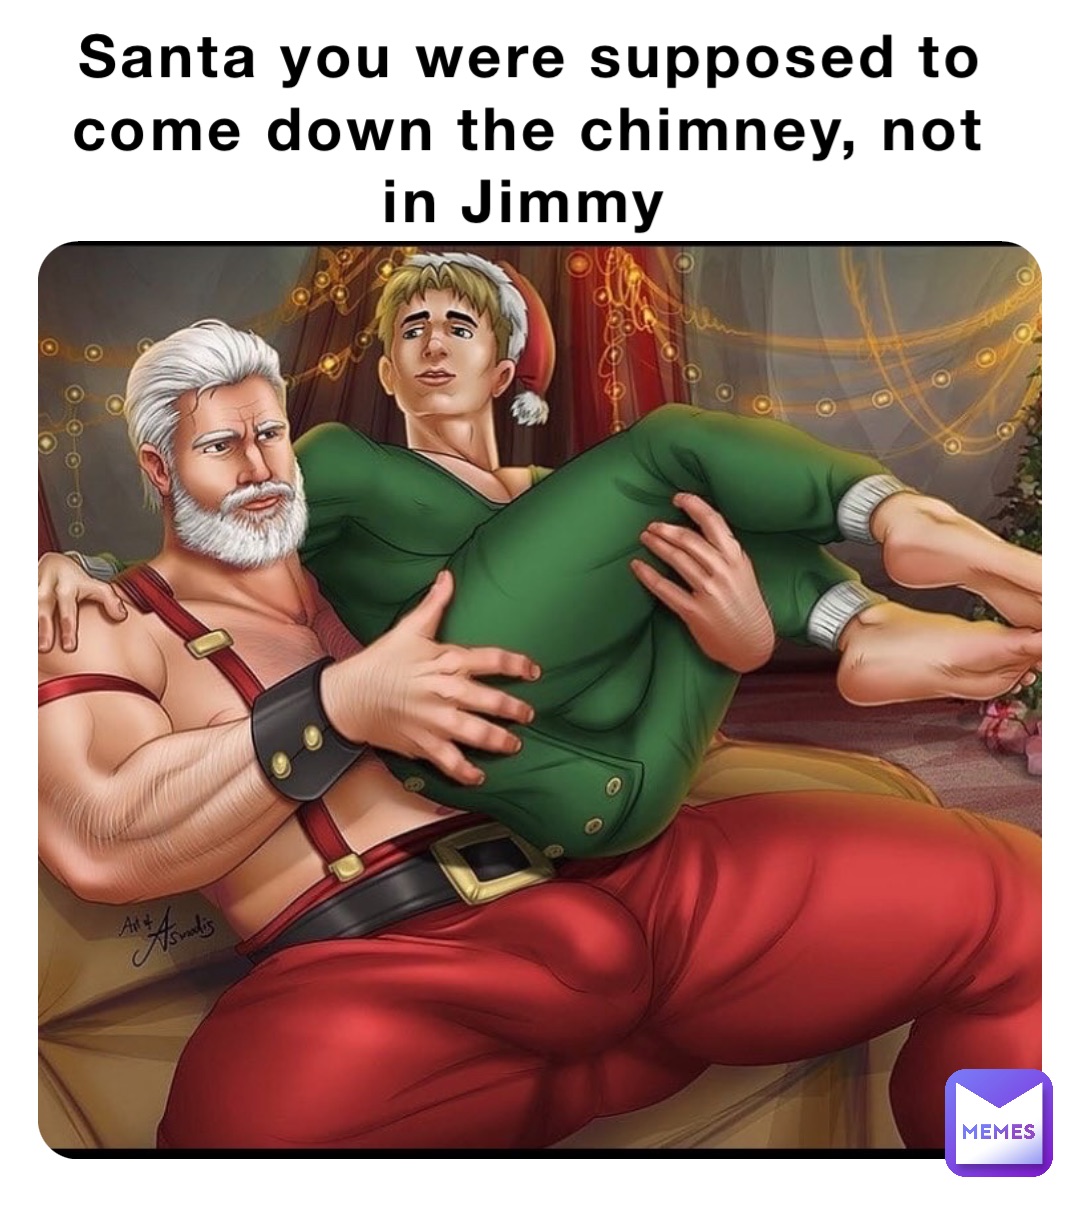 Santa you were supposed to come down the chimney, not in Jimmy